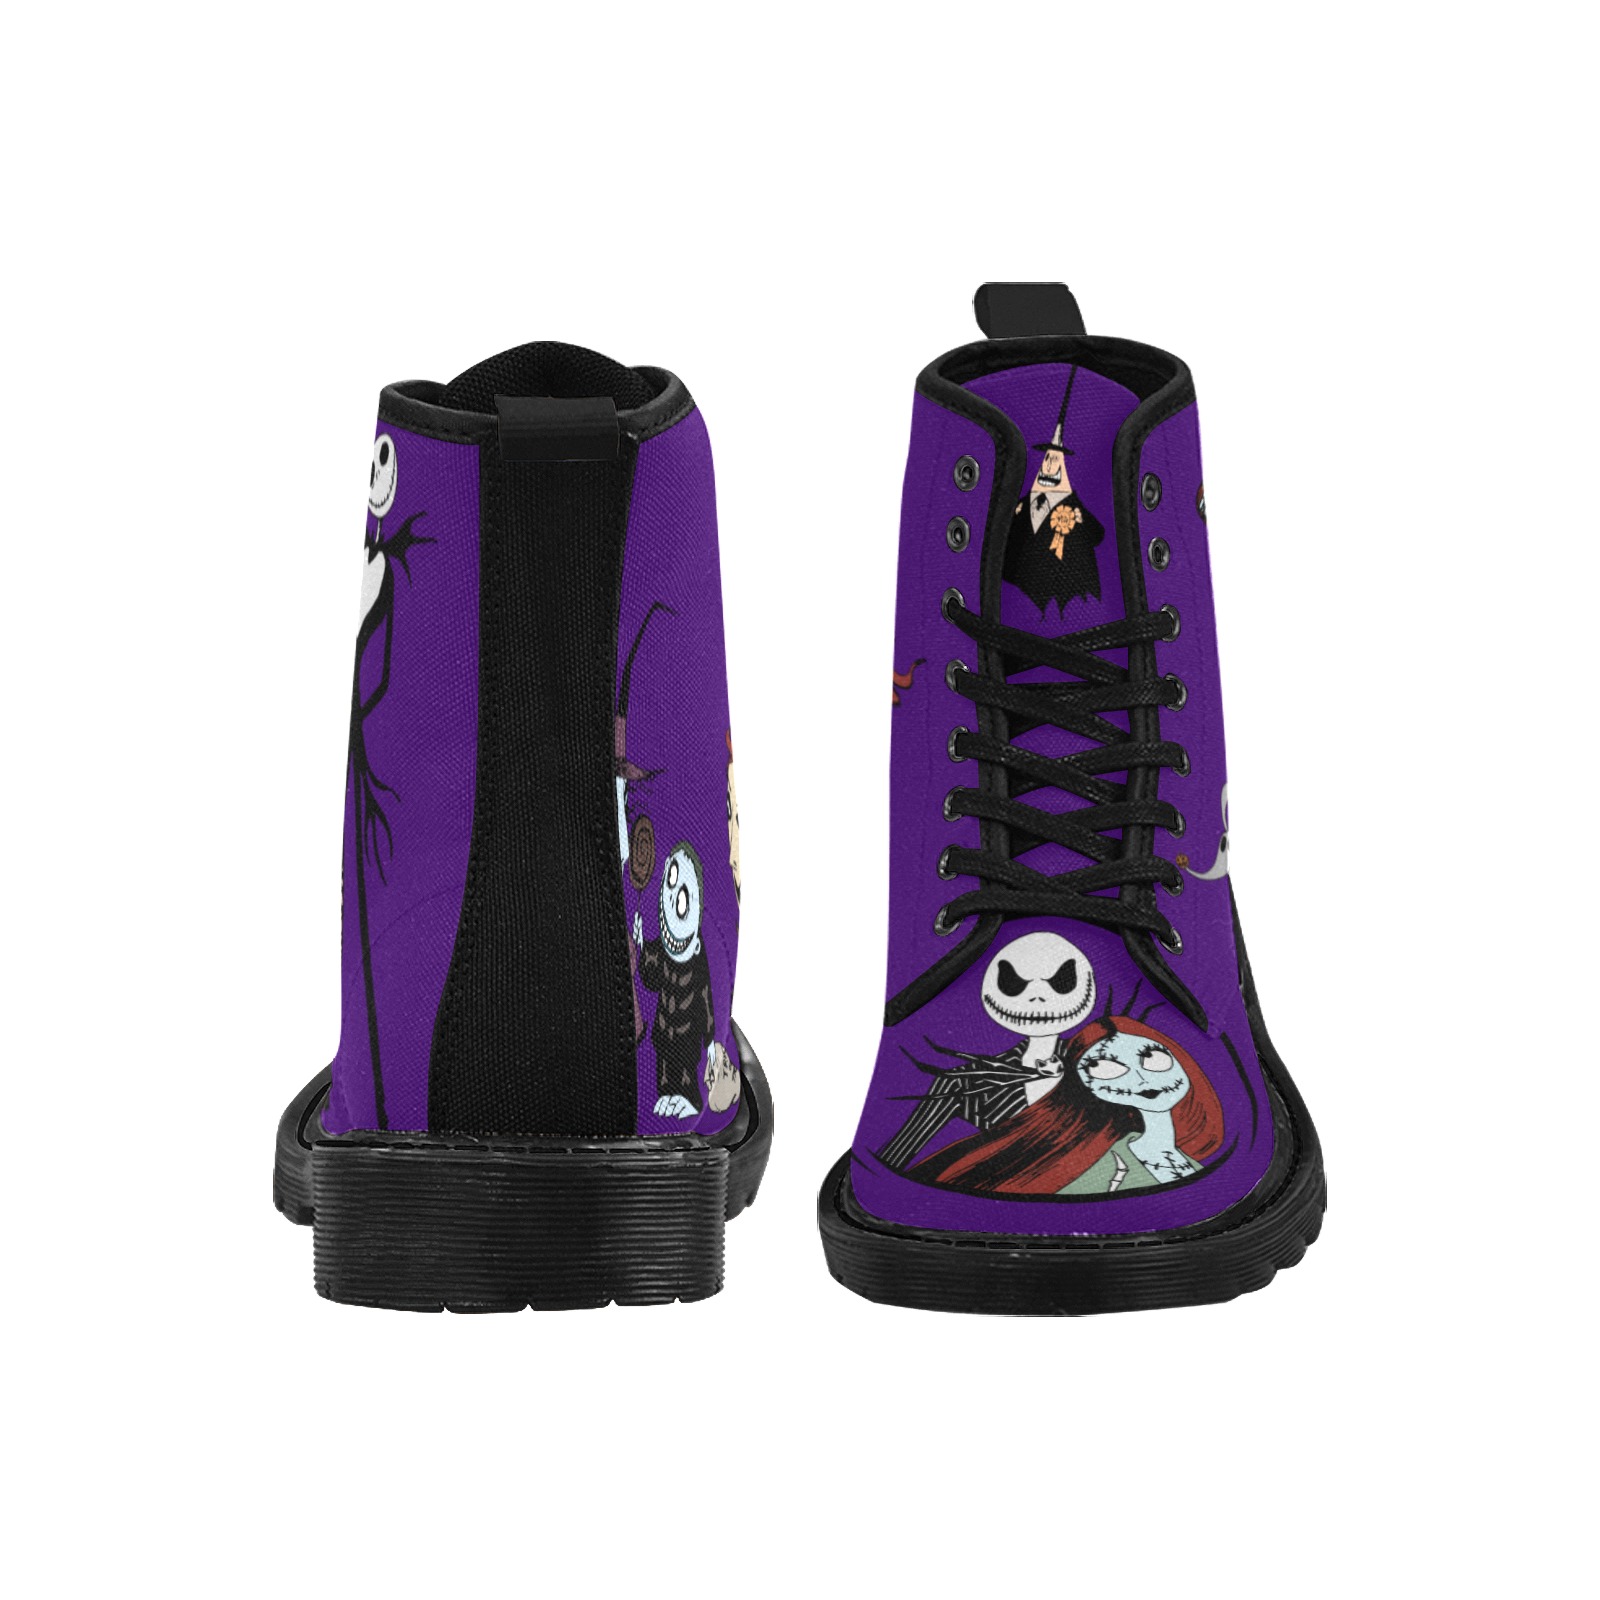 The Nightmare Before Christmas High Black Boots Martin Boots for Women (Black) (Model 1203H)